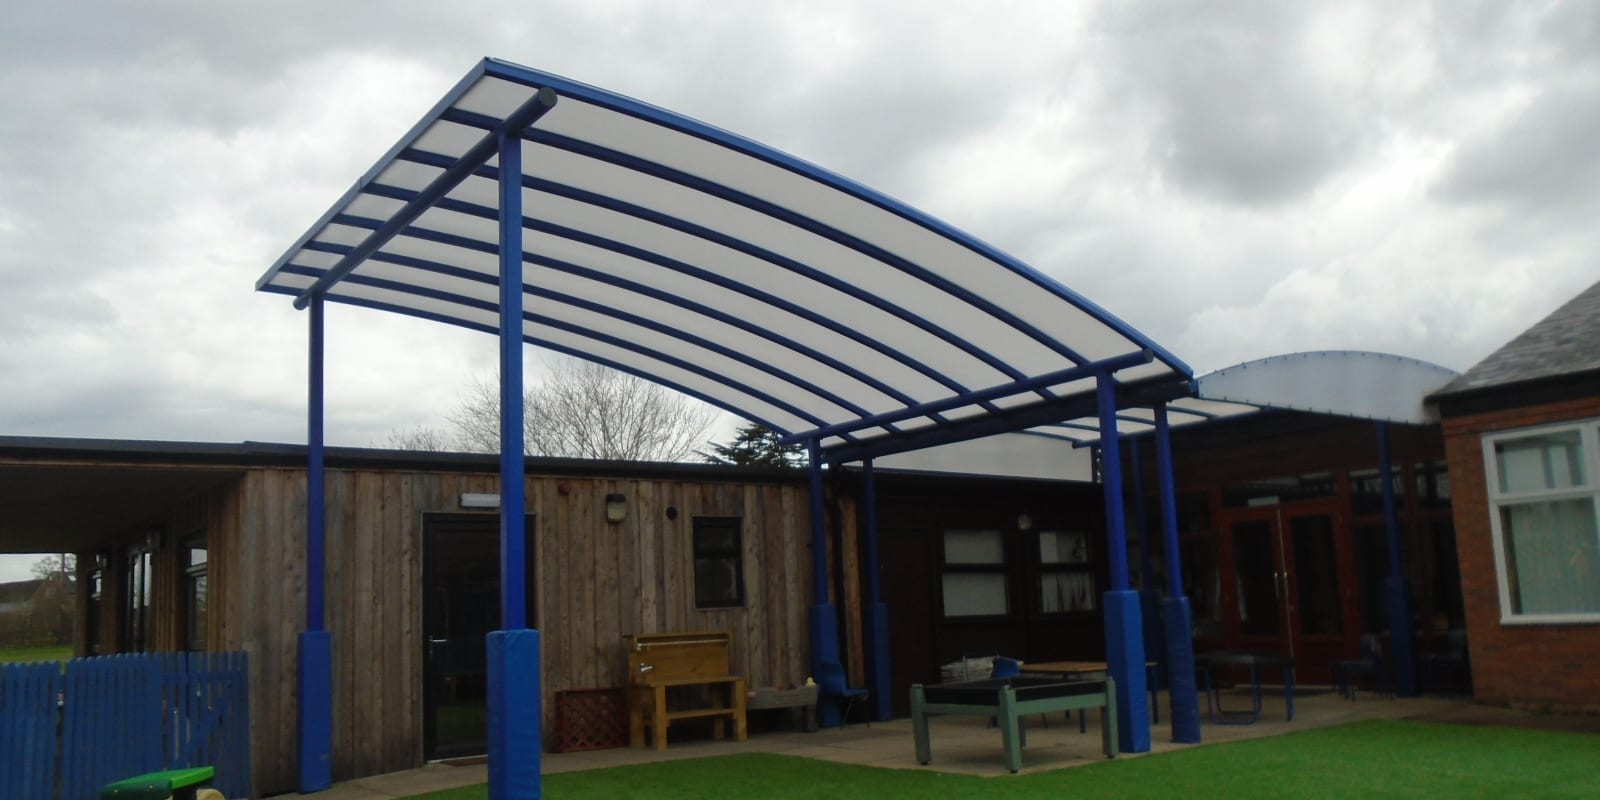 Freestanding playground canopy we made for Newtown Primary School